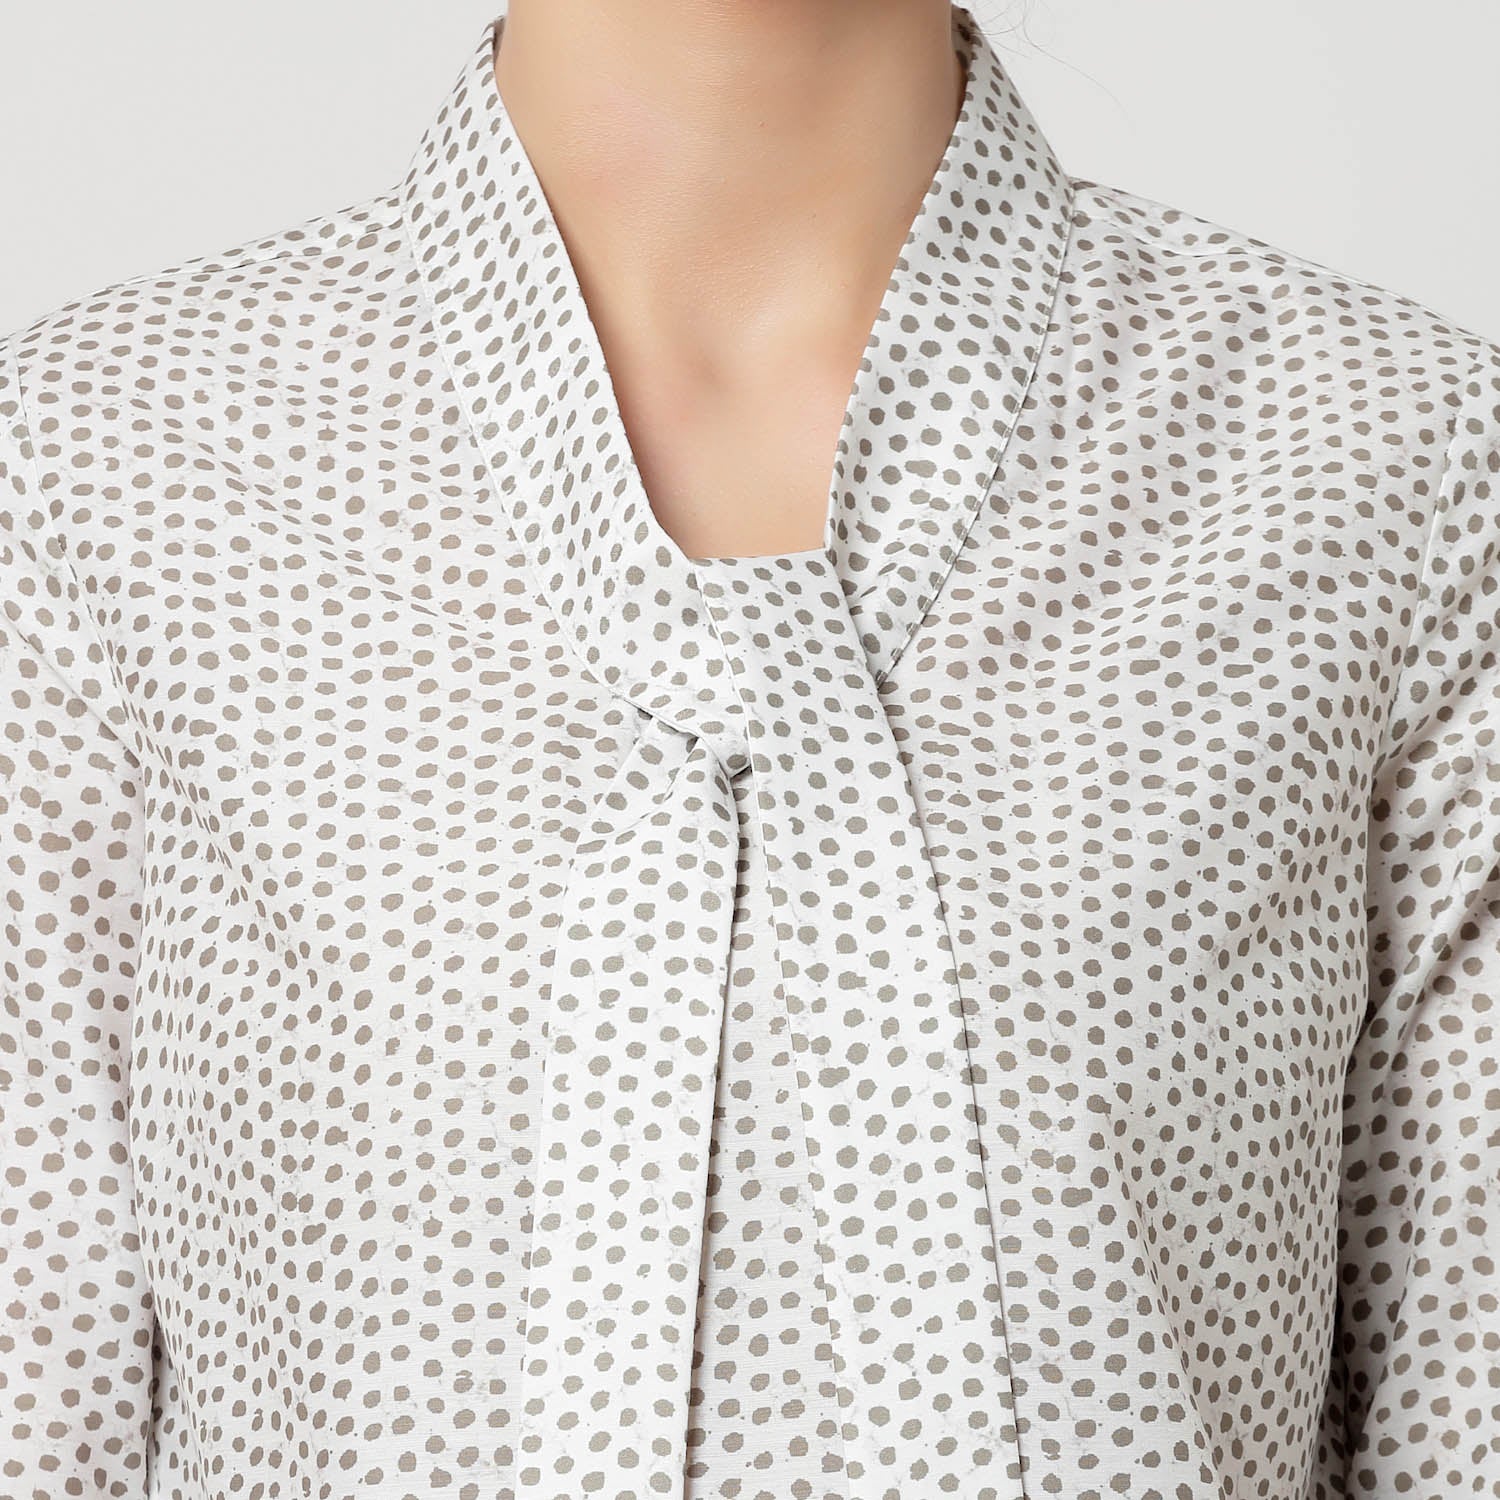 White & Olive Polka Top With Tie Knot